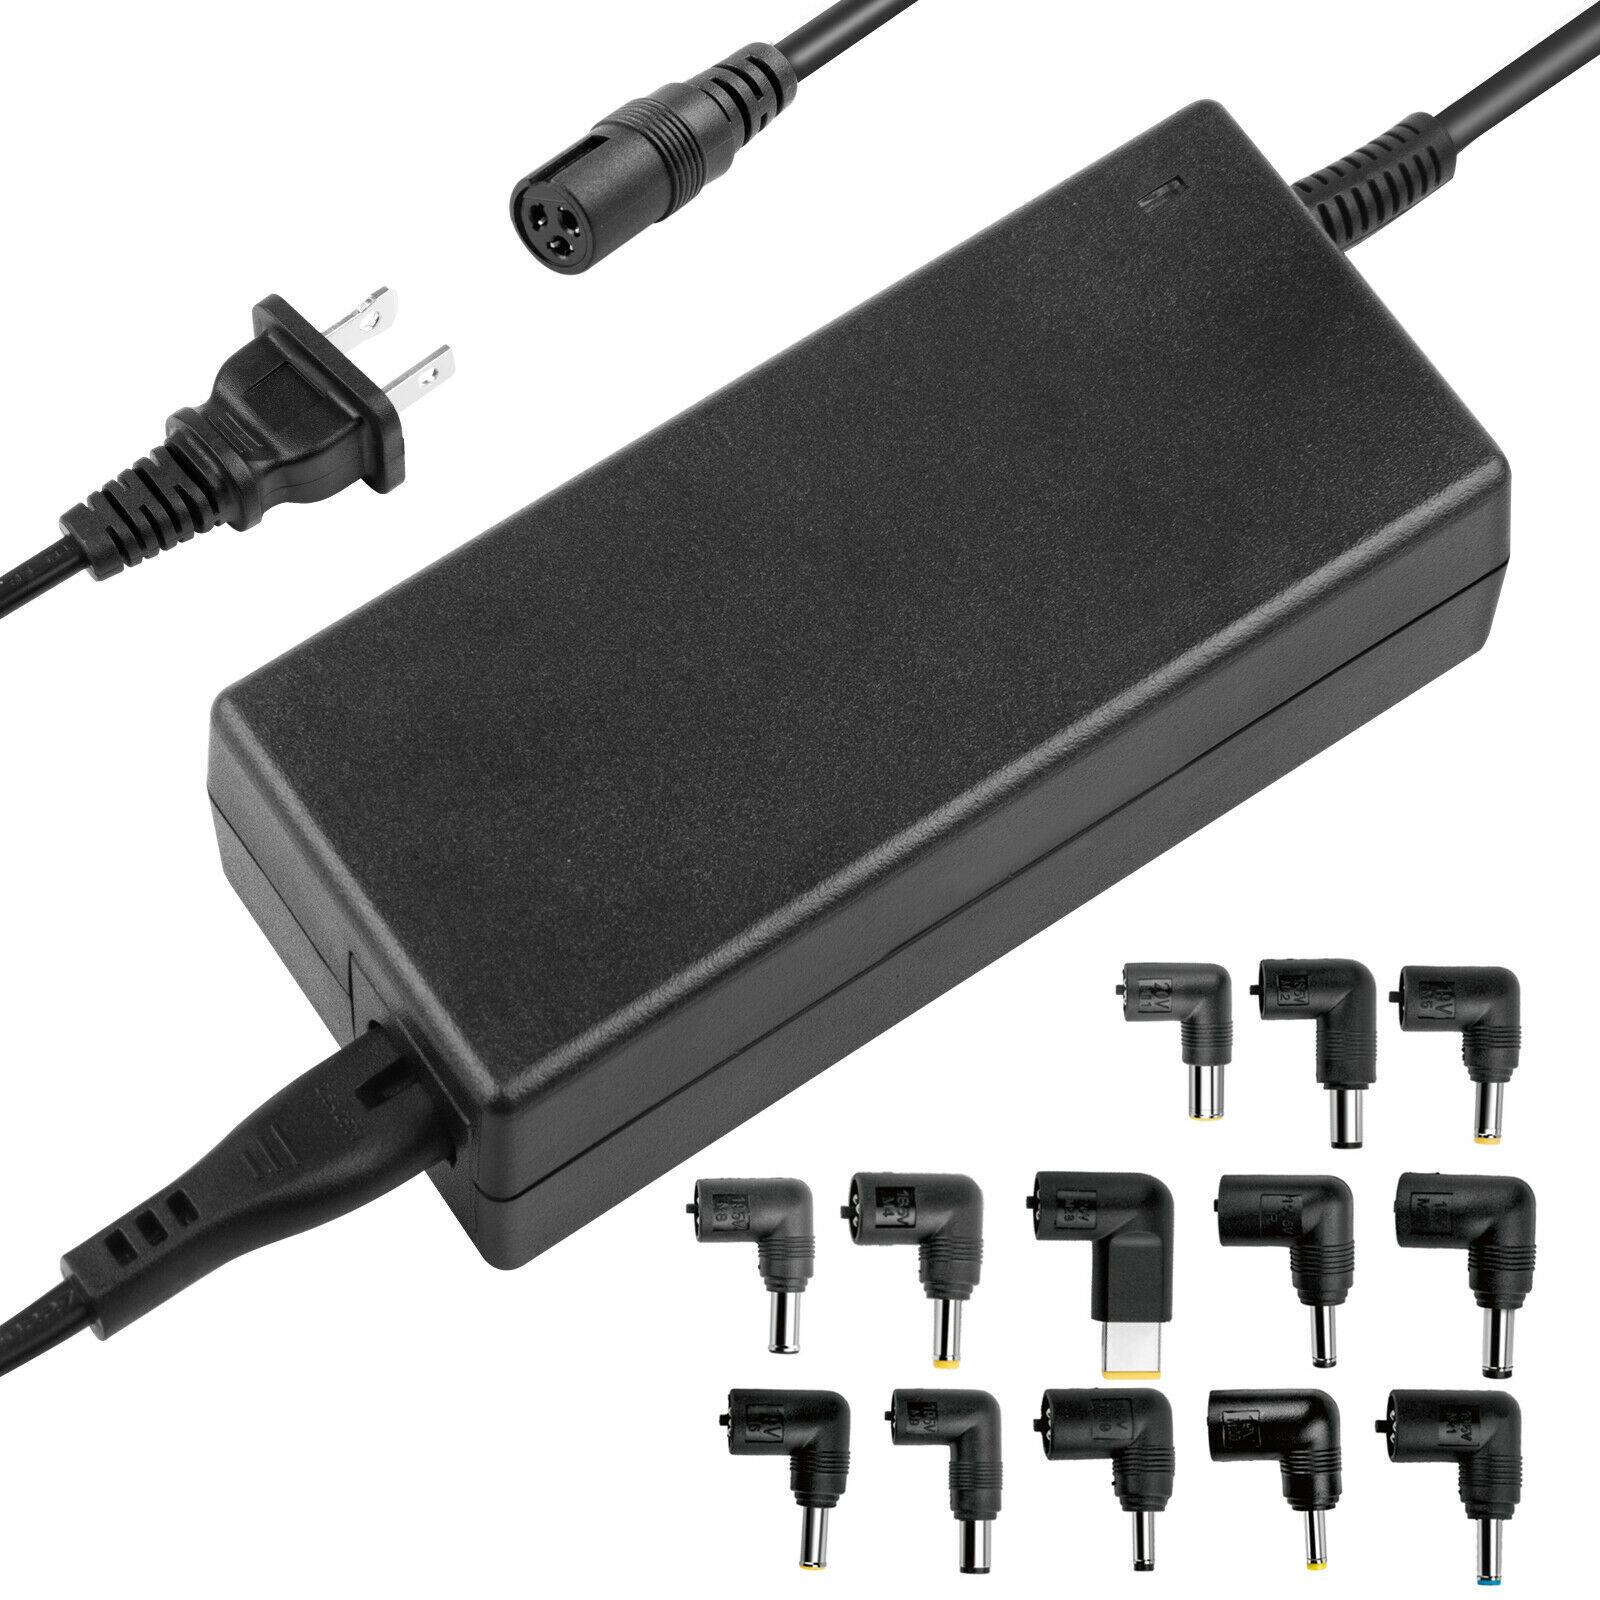 90W Universal Laptop Notebook Power Supply Charger Cord AC Adapter w/ 13 Tips